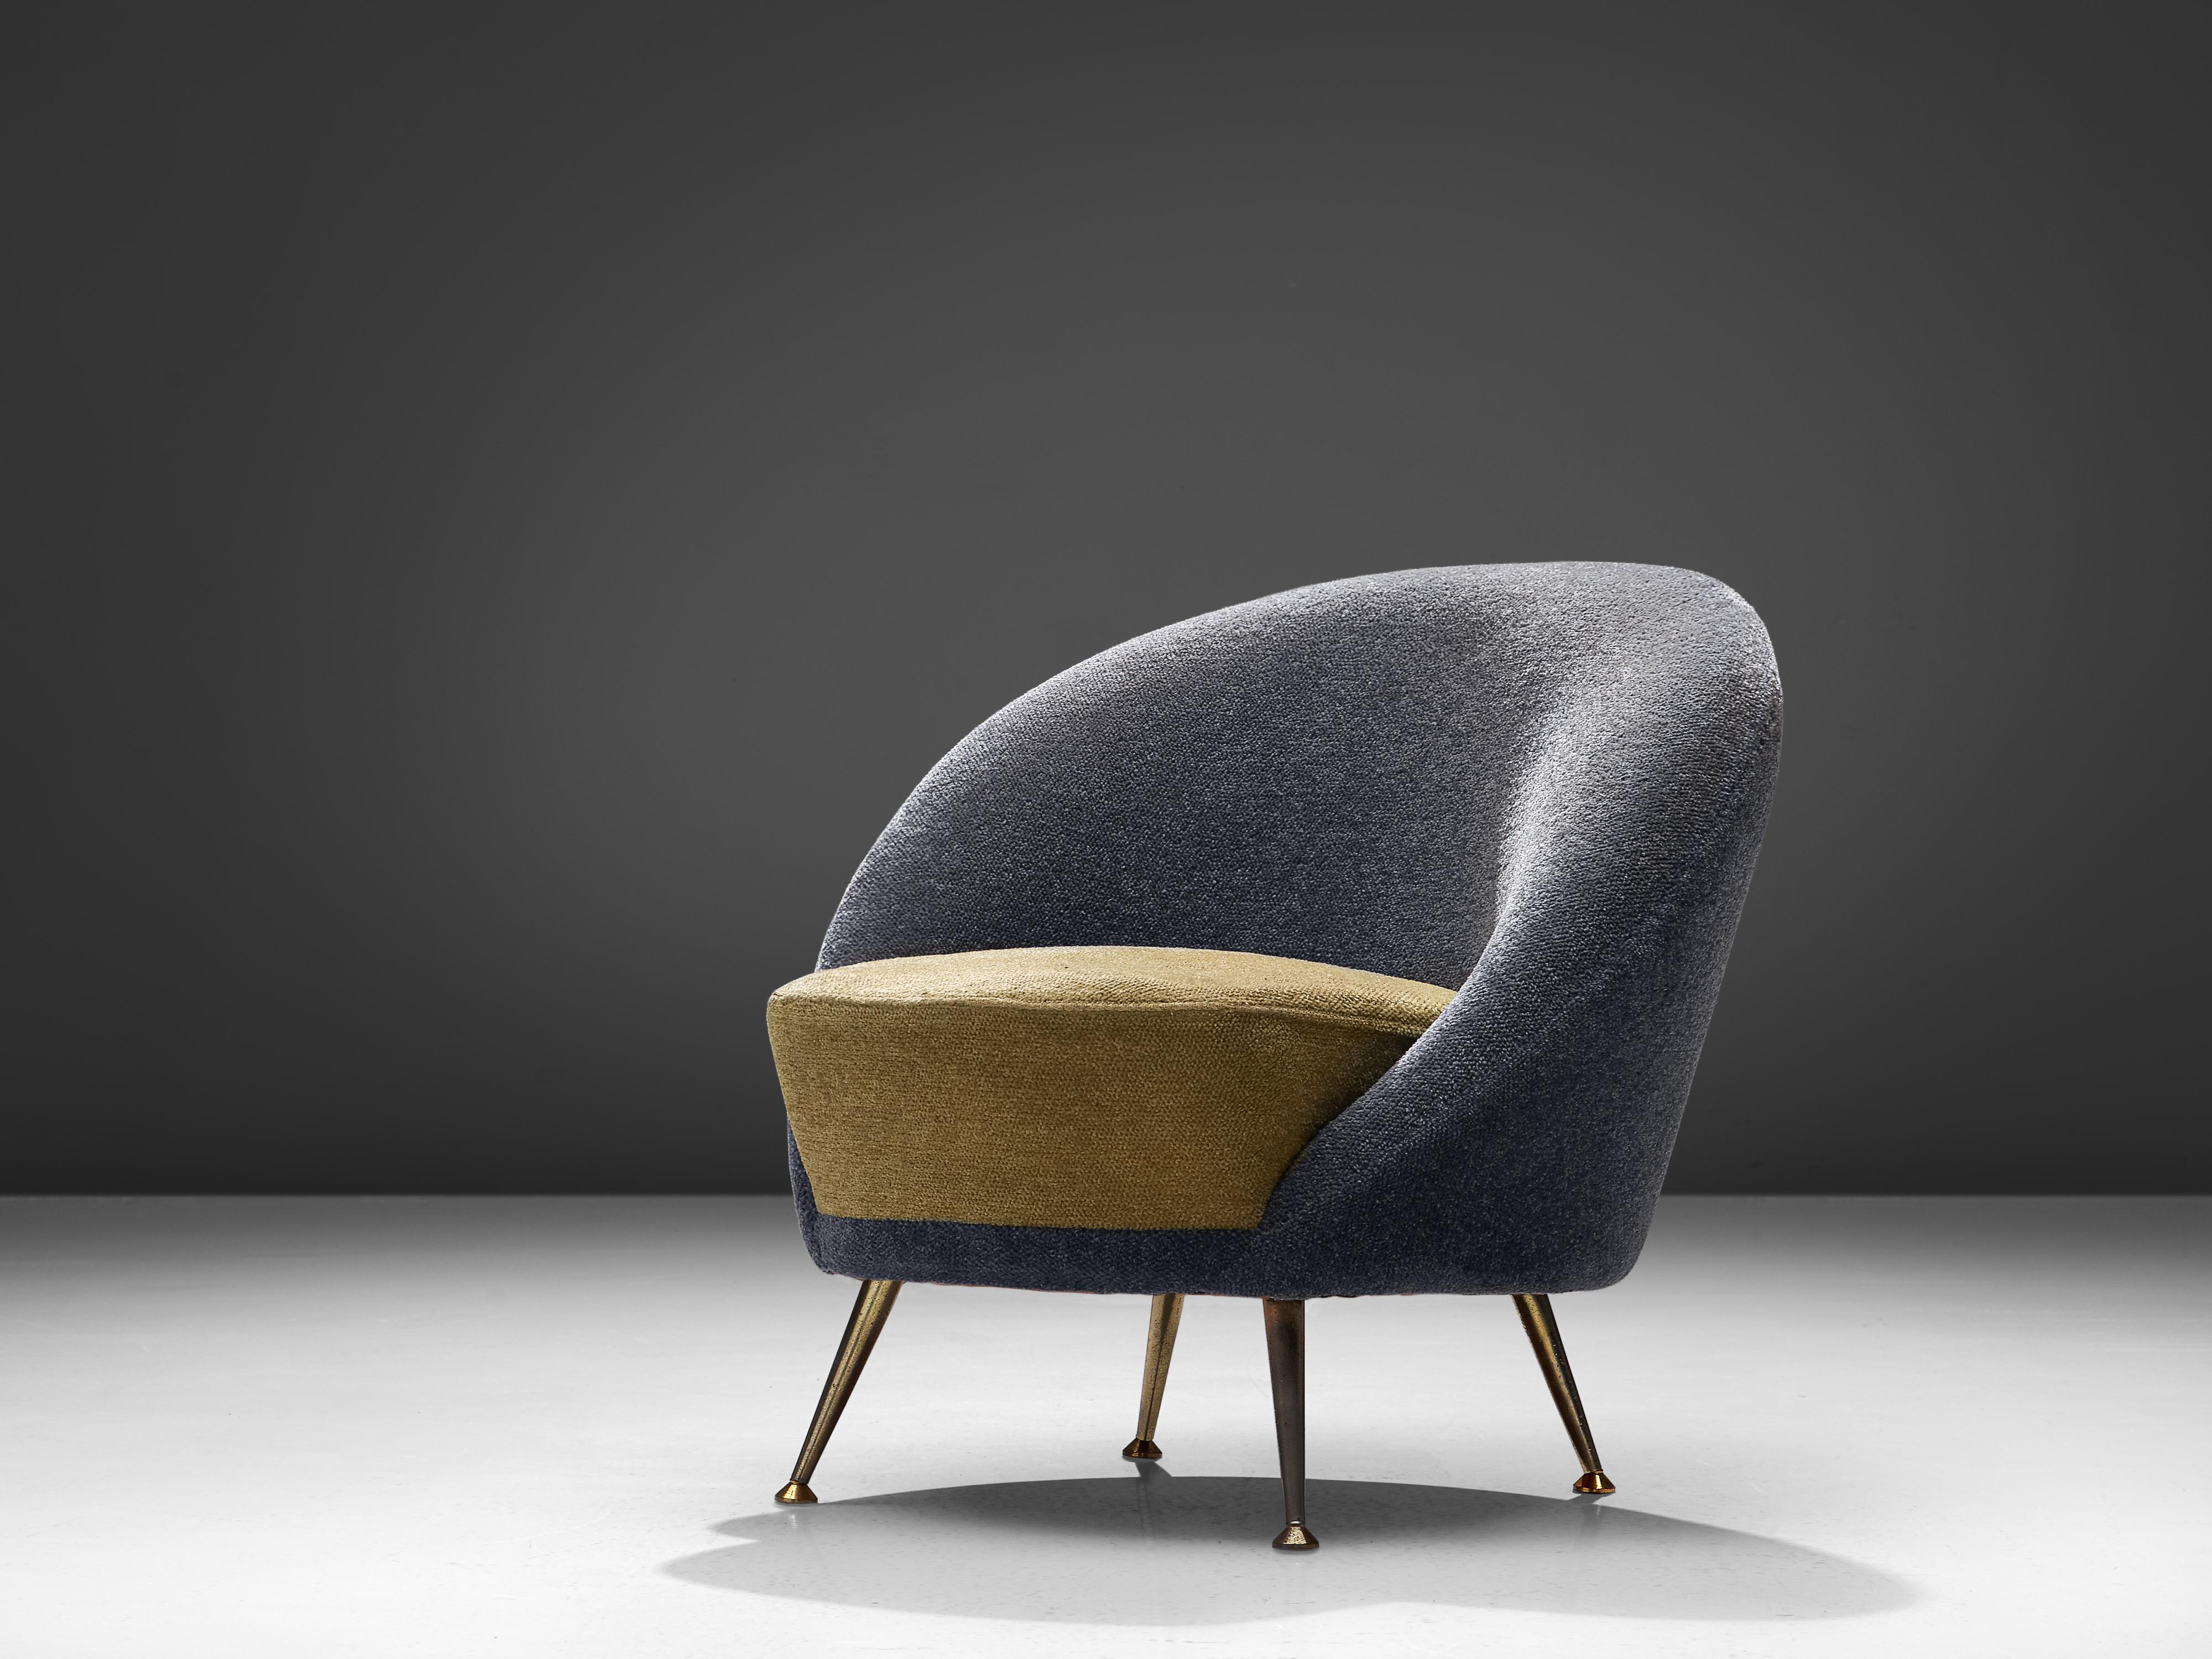 Federico Munari, lounge chair, brass, fabric, Italy, 1960s

This eccentric lounge chair is created by the Italian designer Federico Munari and features an interesting composition. The construction is visually interesting which is based on a